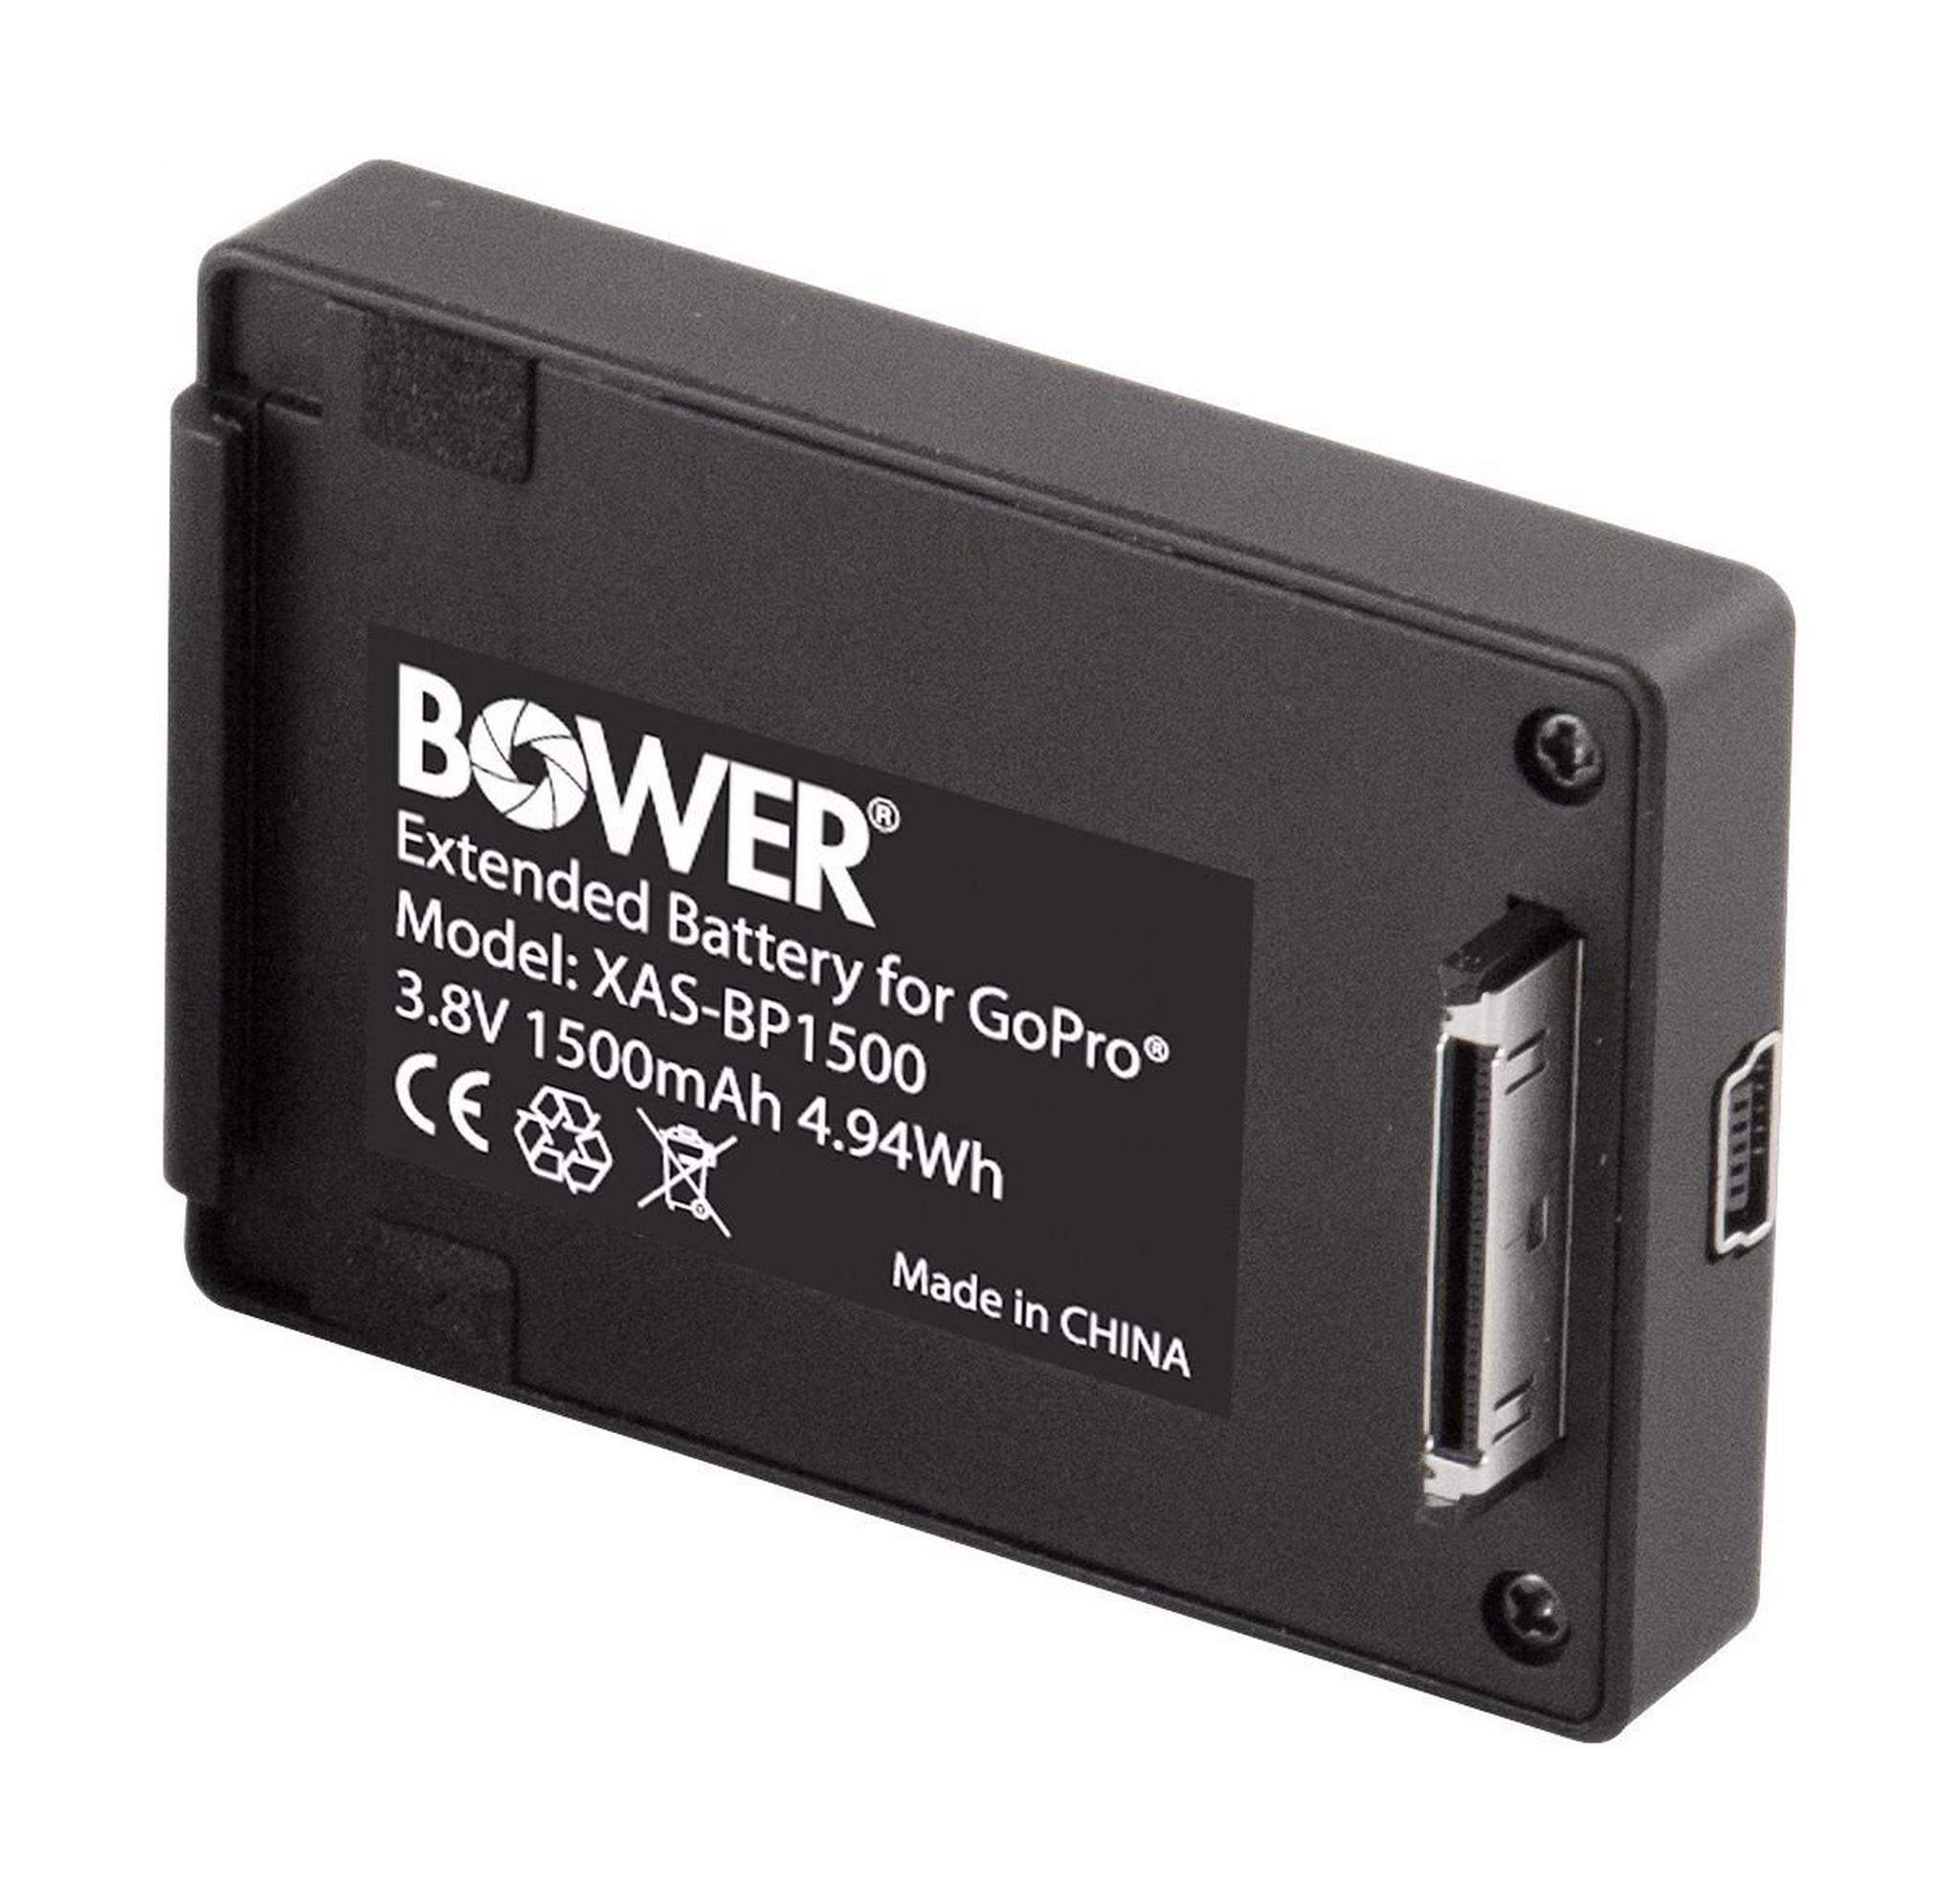 Bower Xtreme Action Series Battery Pack For GoPro H3/4 (XAS-BP1500)